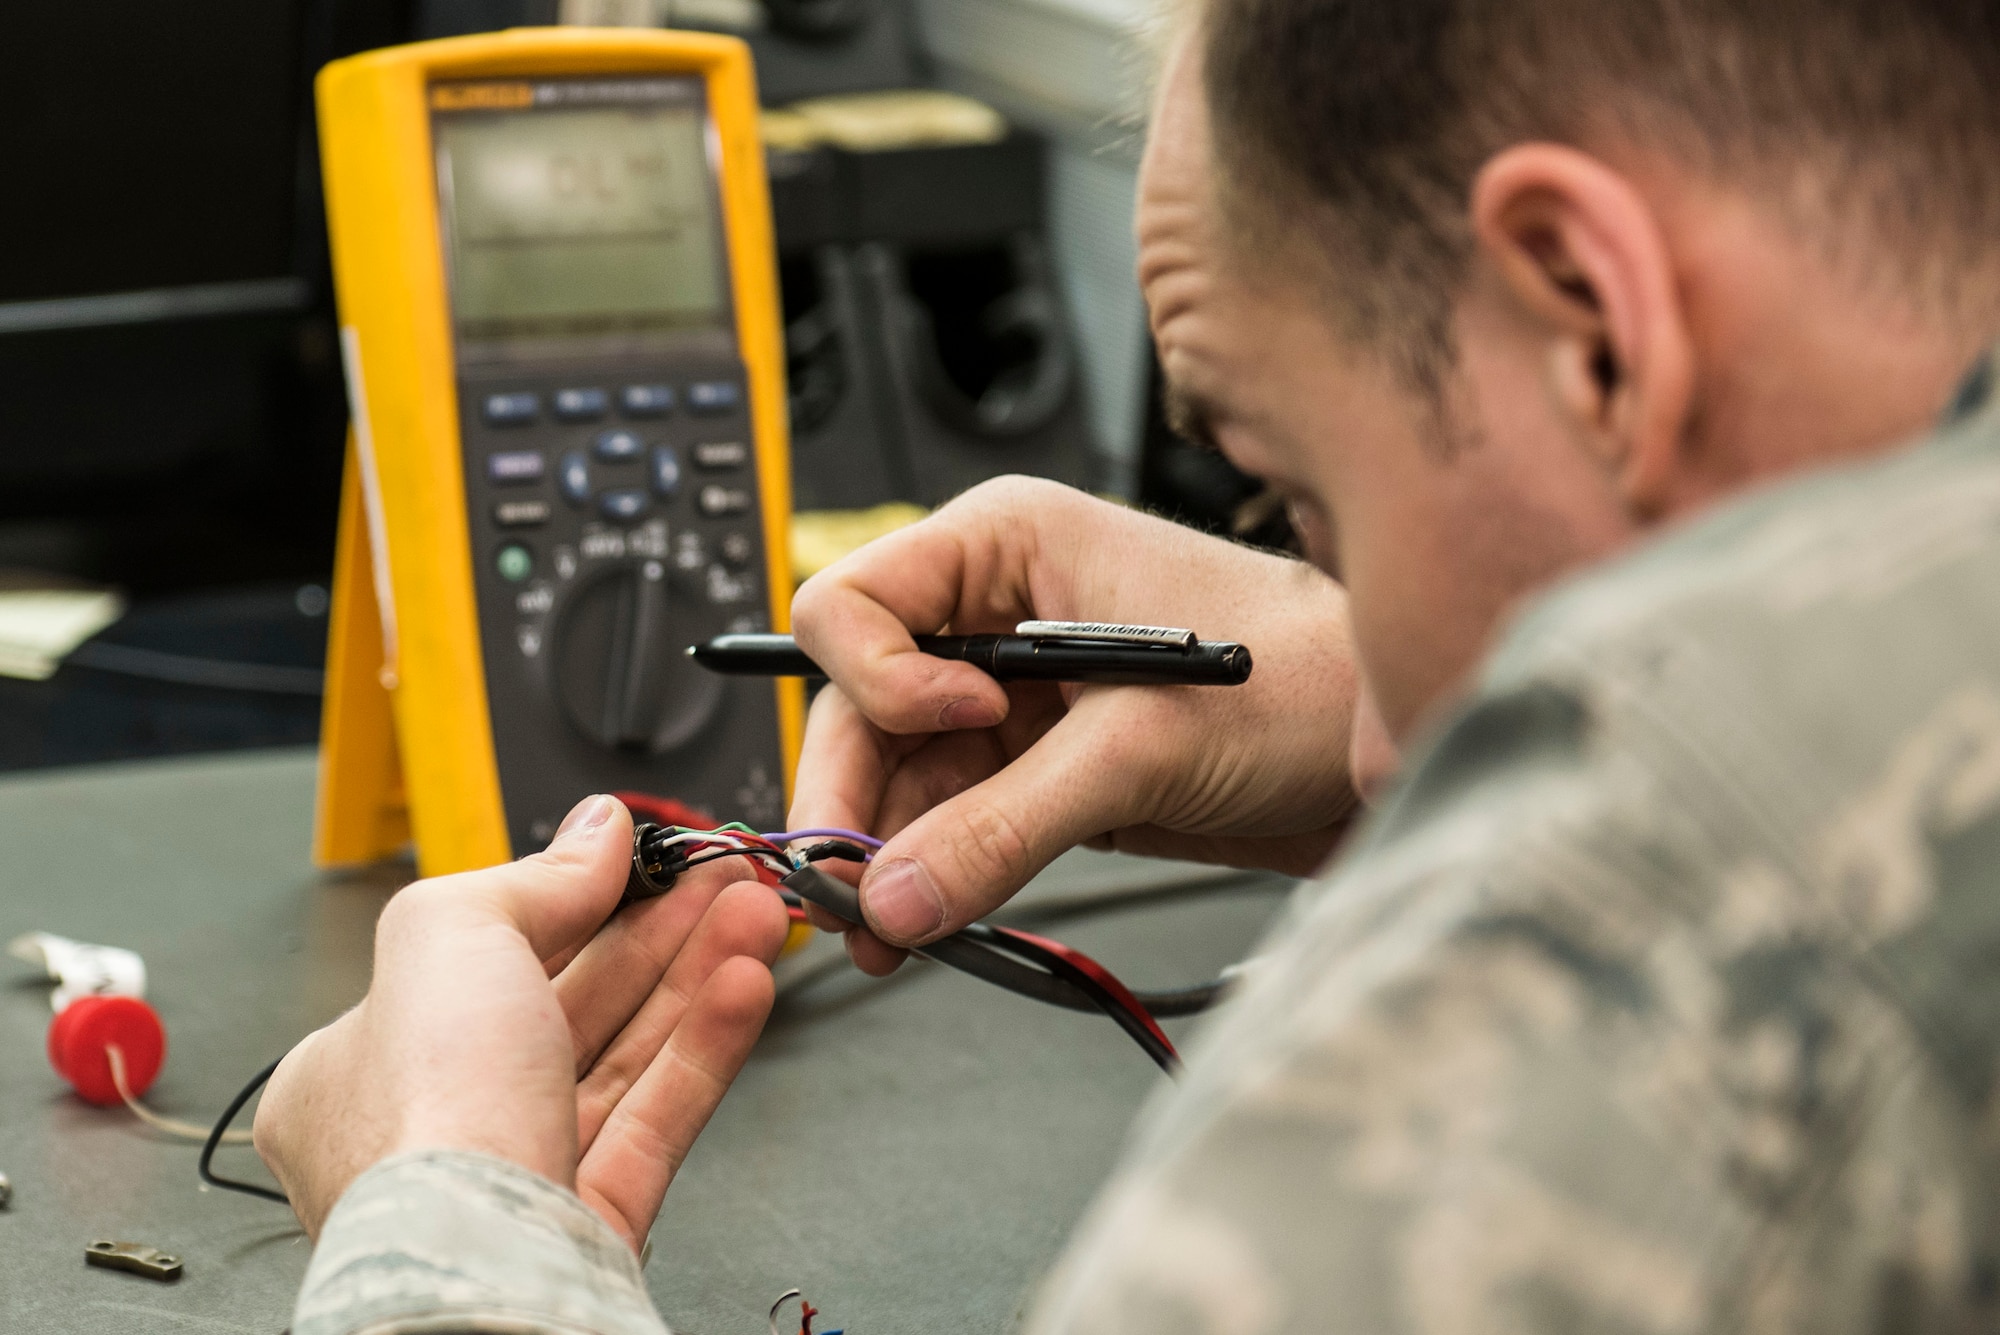 U.S. Air Force Staff Sgt. Brandon Henry, 20th Maintenance Group Air Force Repair Enhancement Program technician, performs preventative maintenance on a weight and balance kit cable at Shaw Air Force Base, S.C., April 20, 2018.